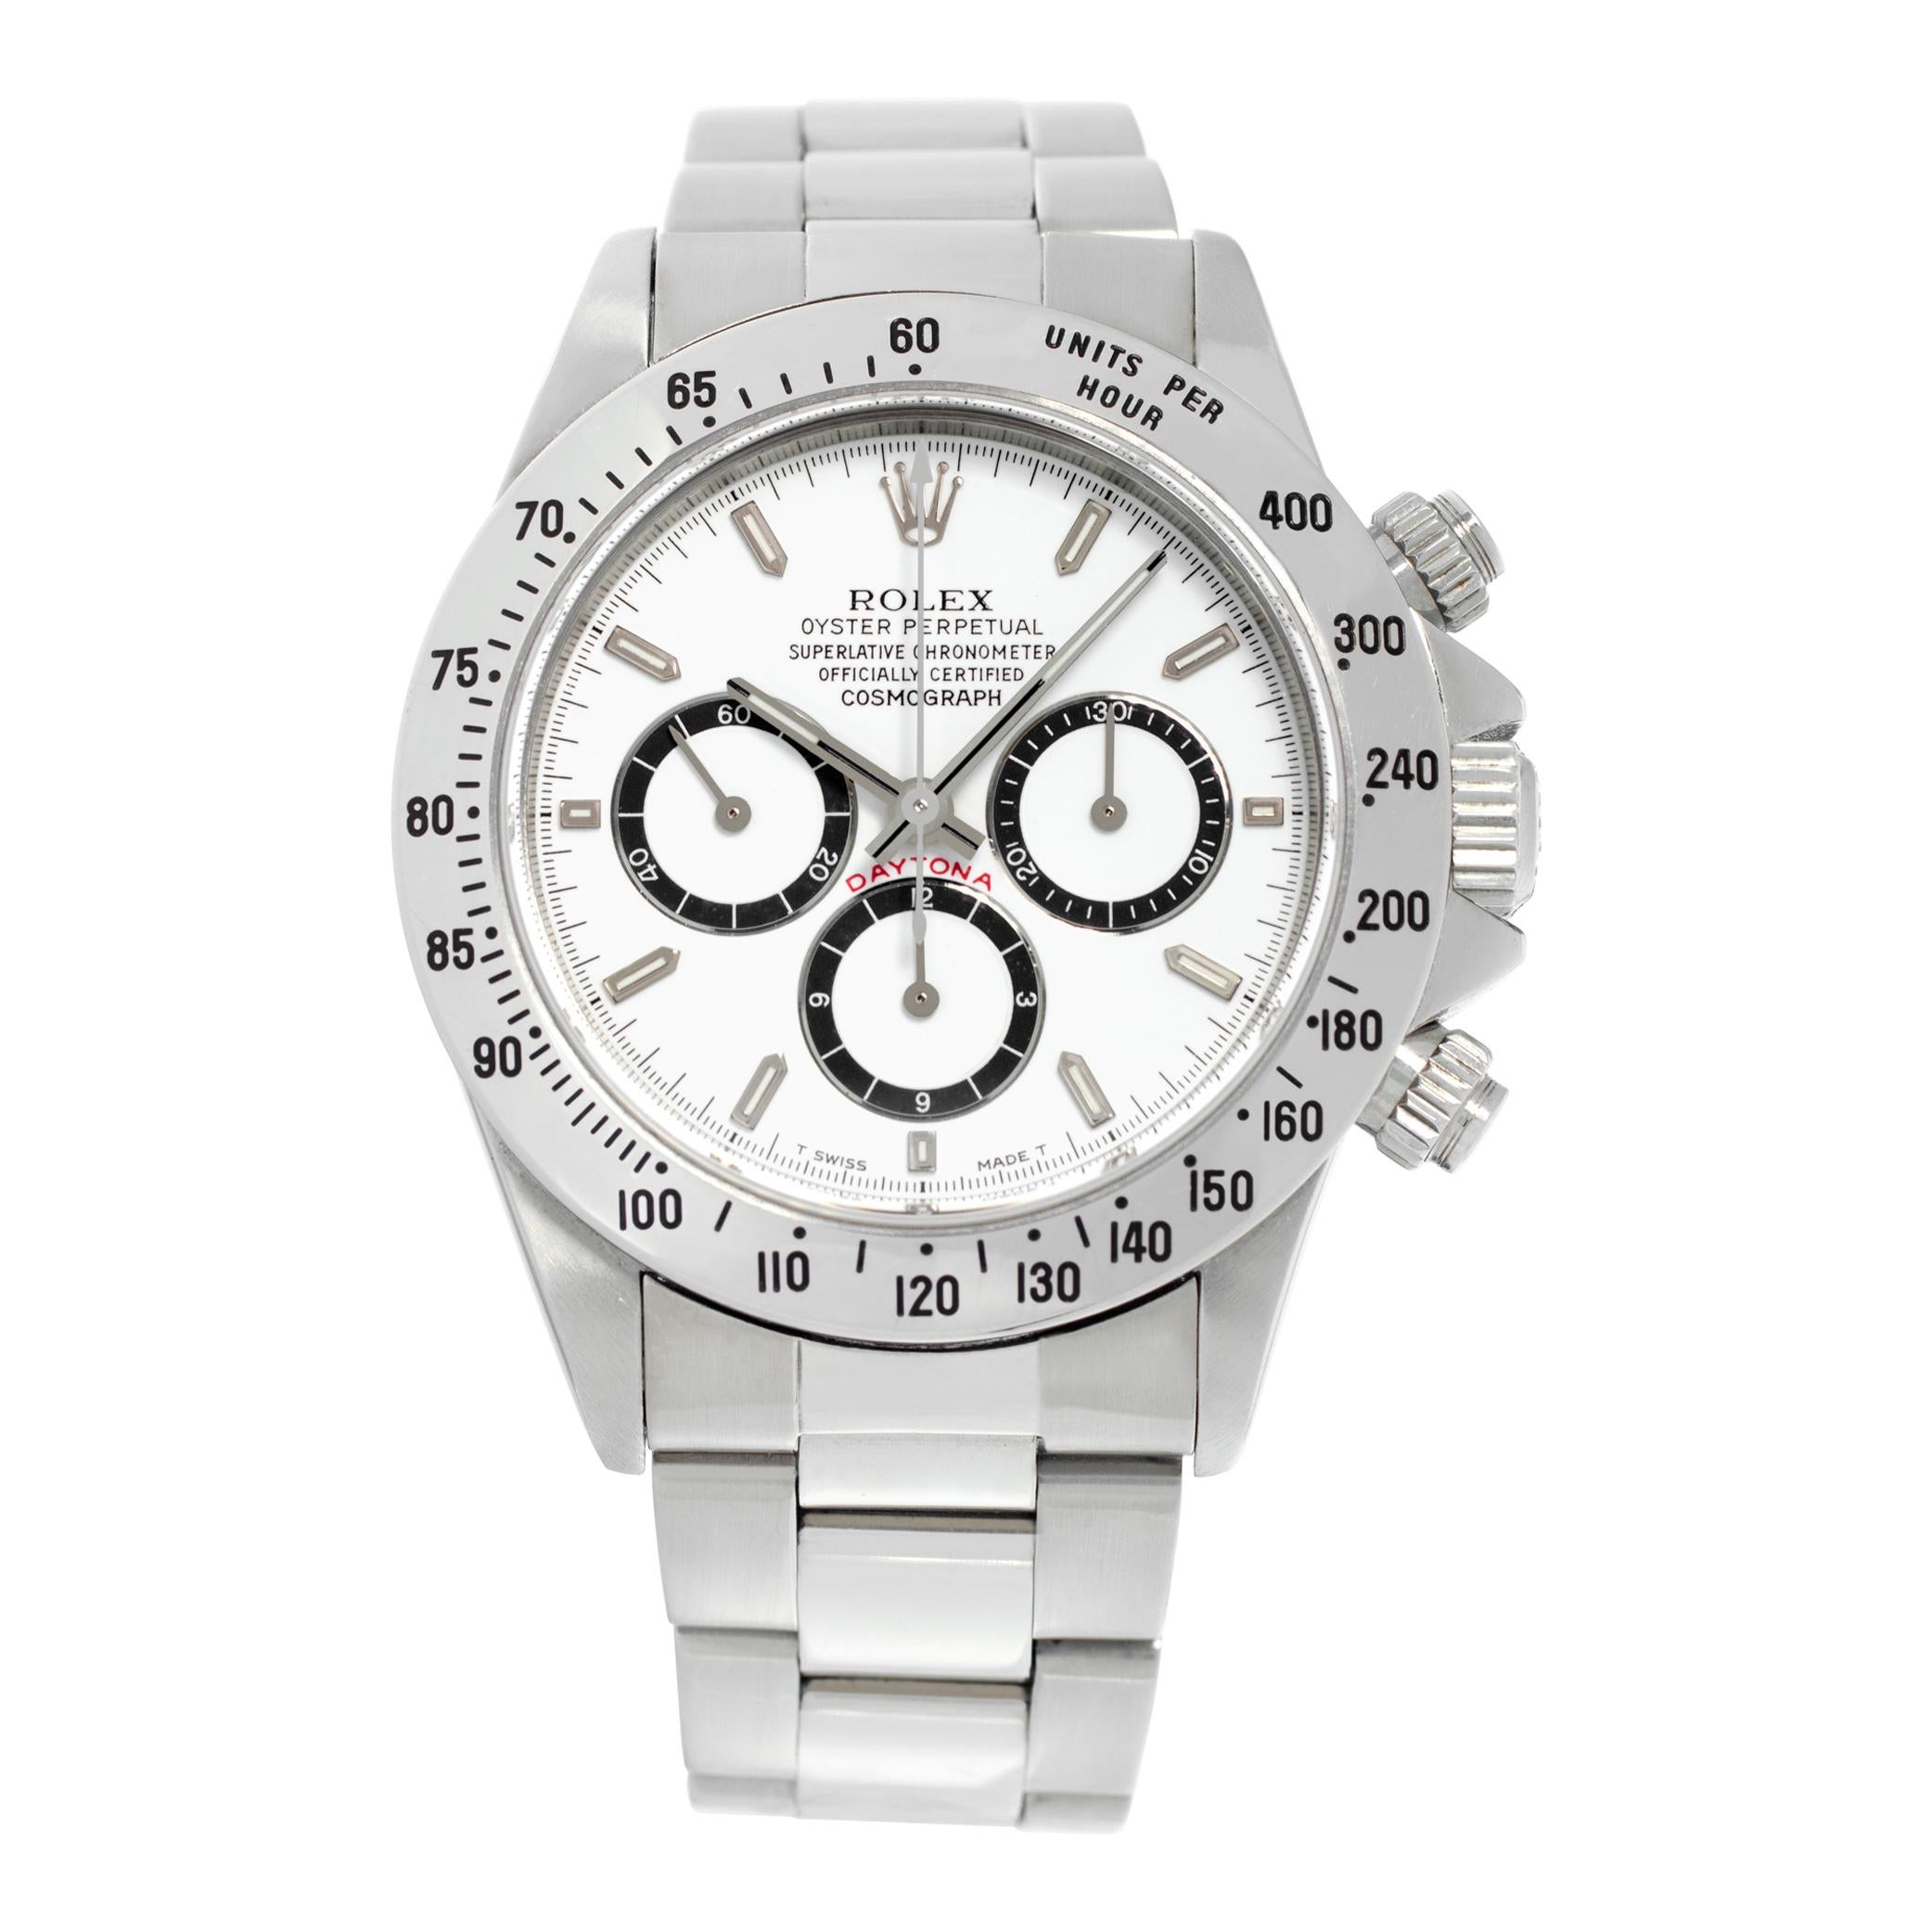 Rolex Daytona 16520 in Stainless Steel with a White dial 40mm Automatic watch